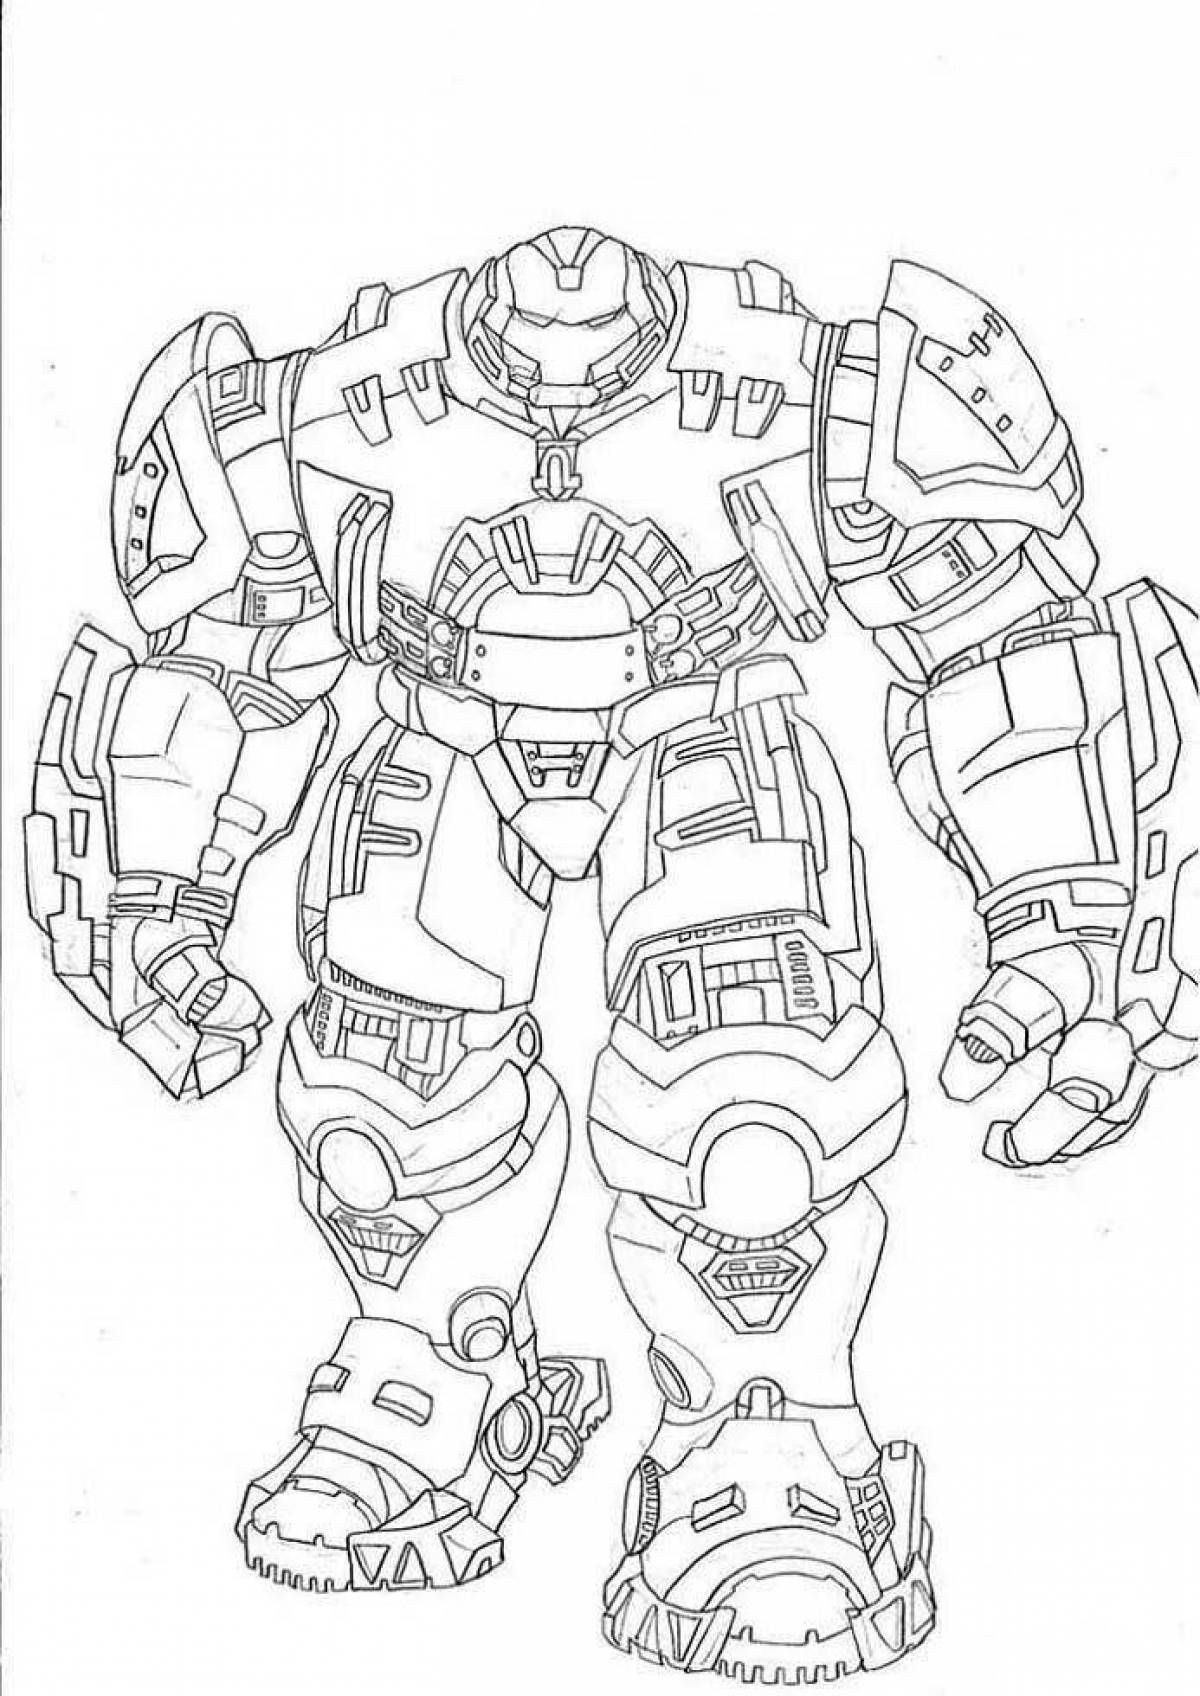 Fun coloring page buster